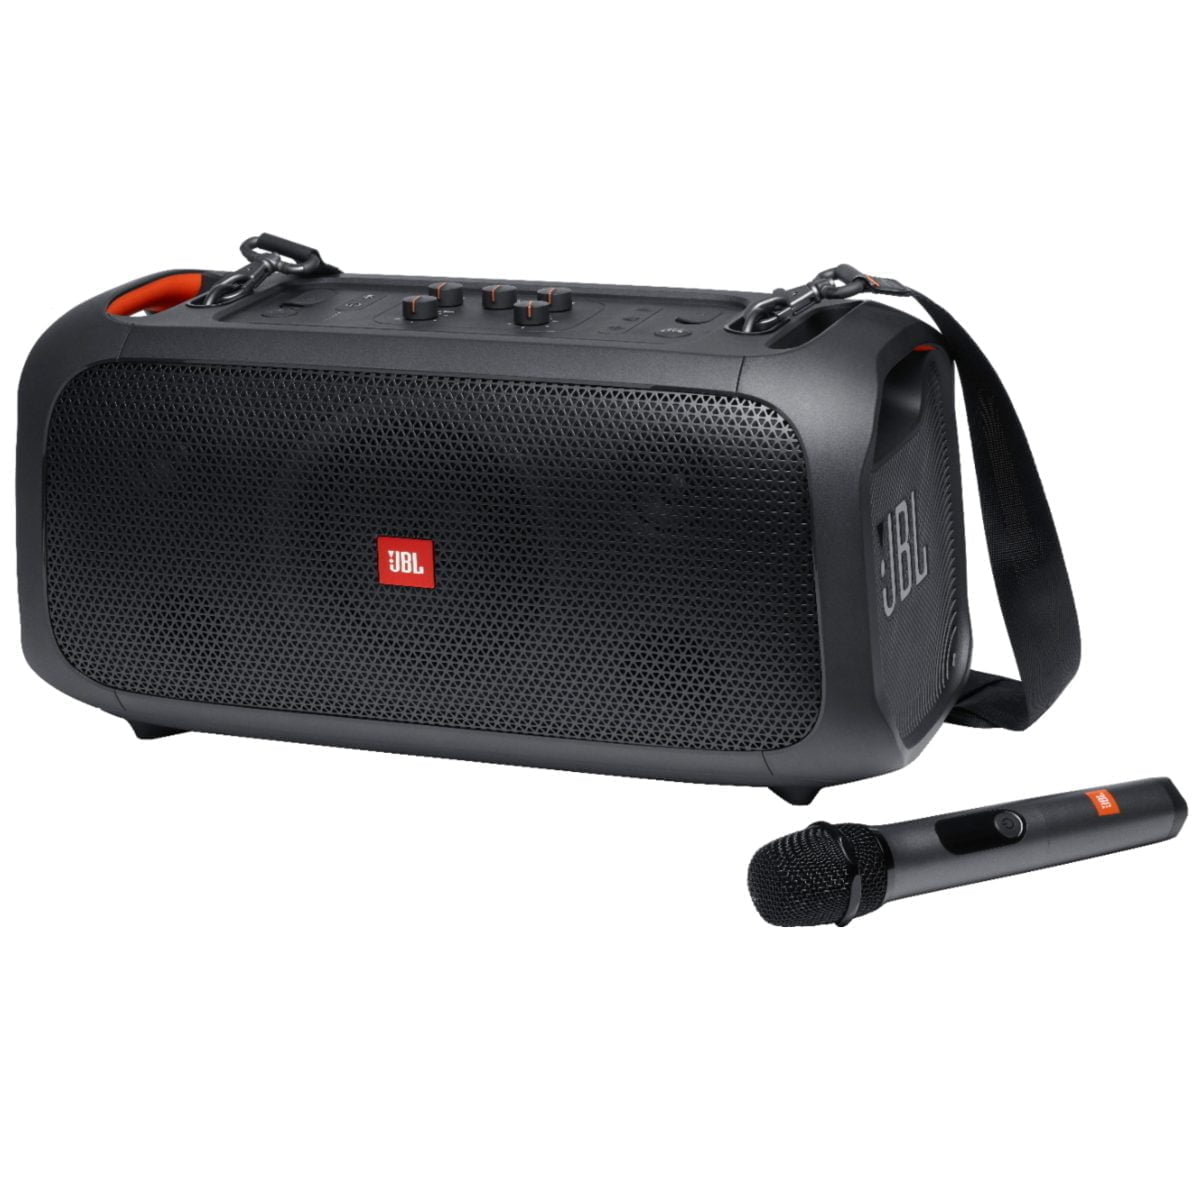 6426699Cv24D Scaled Jbl &Amp;Lt;H1 Class=&Amp;Quot;Heading-5 V-Fw-Regular&Amp;Quot;&Amp;Gt;Jbl - Partybox On-The-Go Portable Party Speaker - Black&Amp;Lt;/H1&Amp;Gt; Take Your Party Anywhere And Sing Everywhere. From Beach Parties To Festivals, The Jbl Partybox On-The-Go Lets You See, Hear And Feel The Beat. Turn It Up Loud With 100 Watts Of Powerful Jbl Pro Sound, Synched To A Dazzling Light Show. Access Your Favorite Tunes With Bluetooth, Usb, Aux And Tws (True Wireless Stereo) Connectivity, Grab A Friend And Sing Your Hearts Out With The Jbl Wireless Mics, Or Use The Instrument Input To Play Along. With A Bottle Opener, Padded Shoulder Strap, Rechargeable Battery And Ipx4 Splash-Proof Protection, The Jbl Partybox On-The-Go Has Everything You Need To Get The Party Started—And Take It With You. Jbl Partybox Jbl Partybox On-The-Go Portable Party Speaker - Black